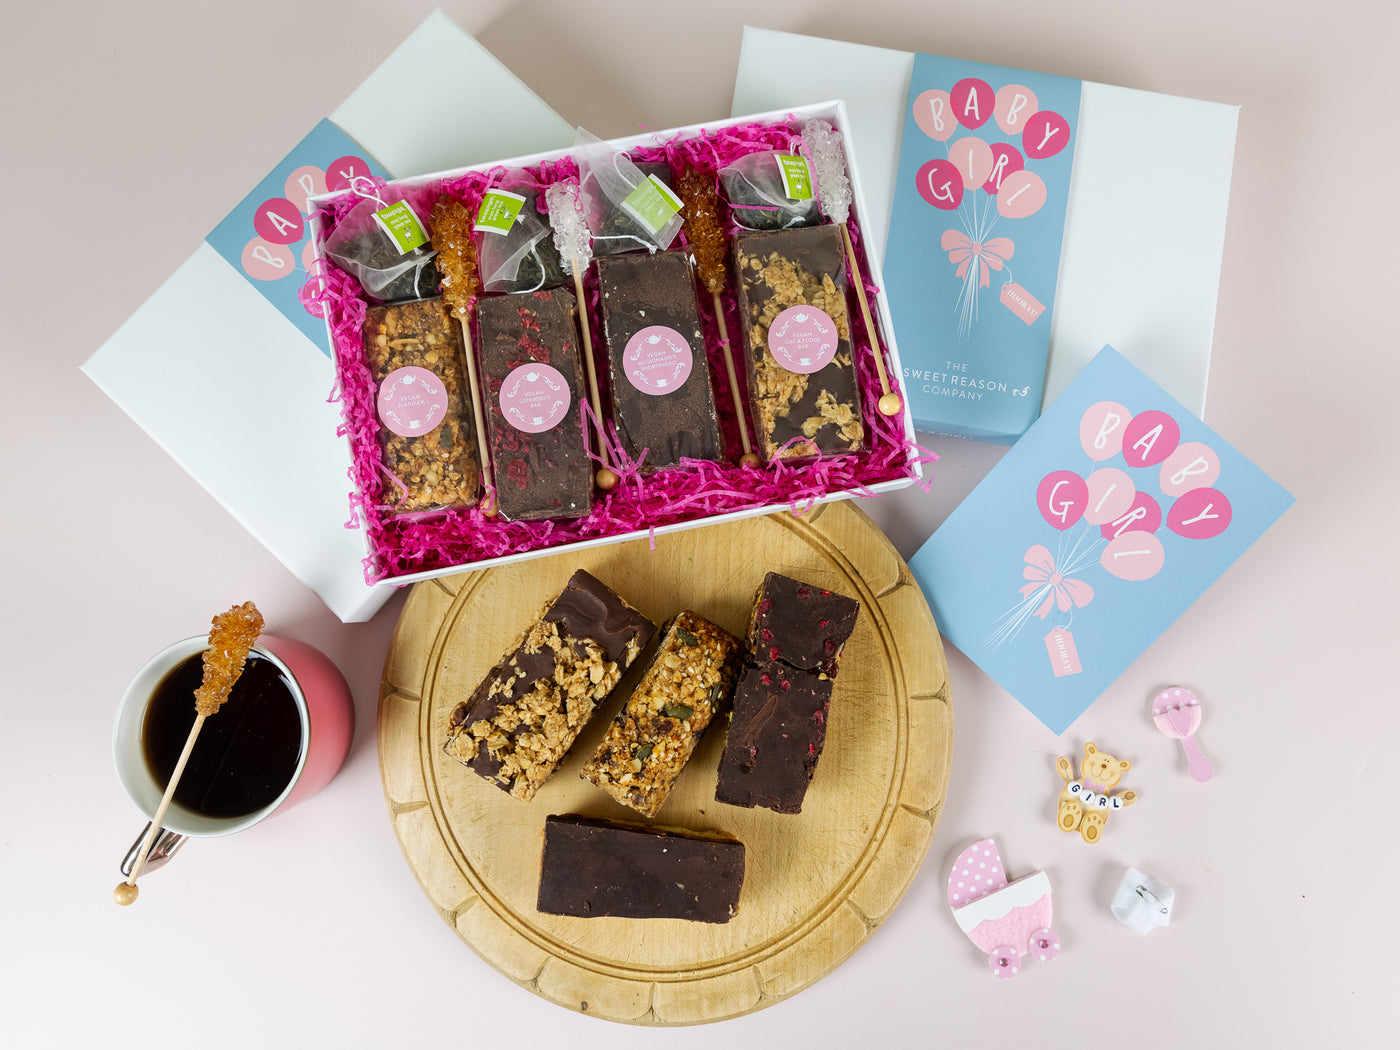 'Baby Girl' Vegan Afternoon Tea for Four Gift